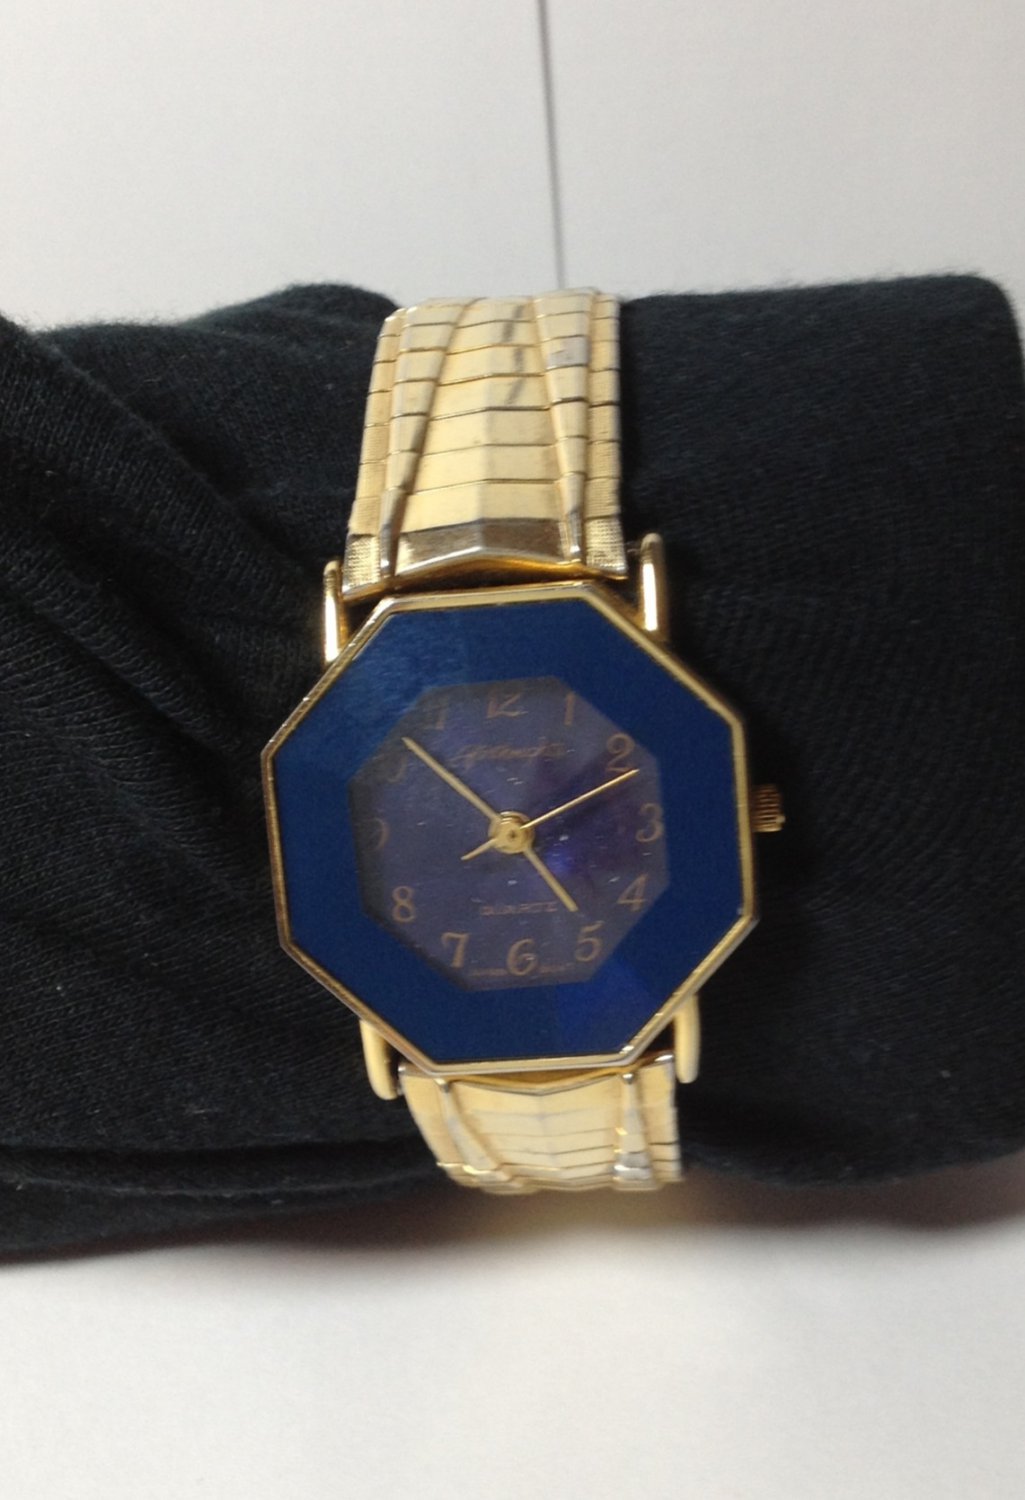 Vintage Afterthoughts Hexagonal 14 Kt Plated Ladies Watch Working Great New Battery